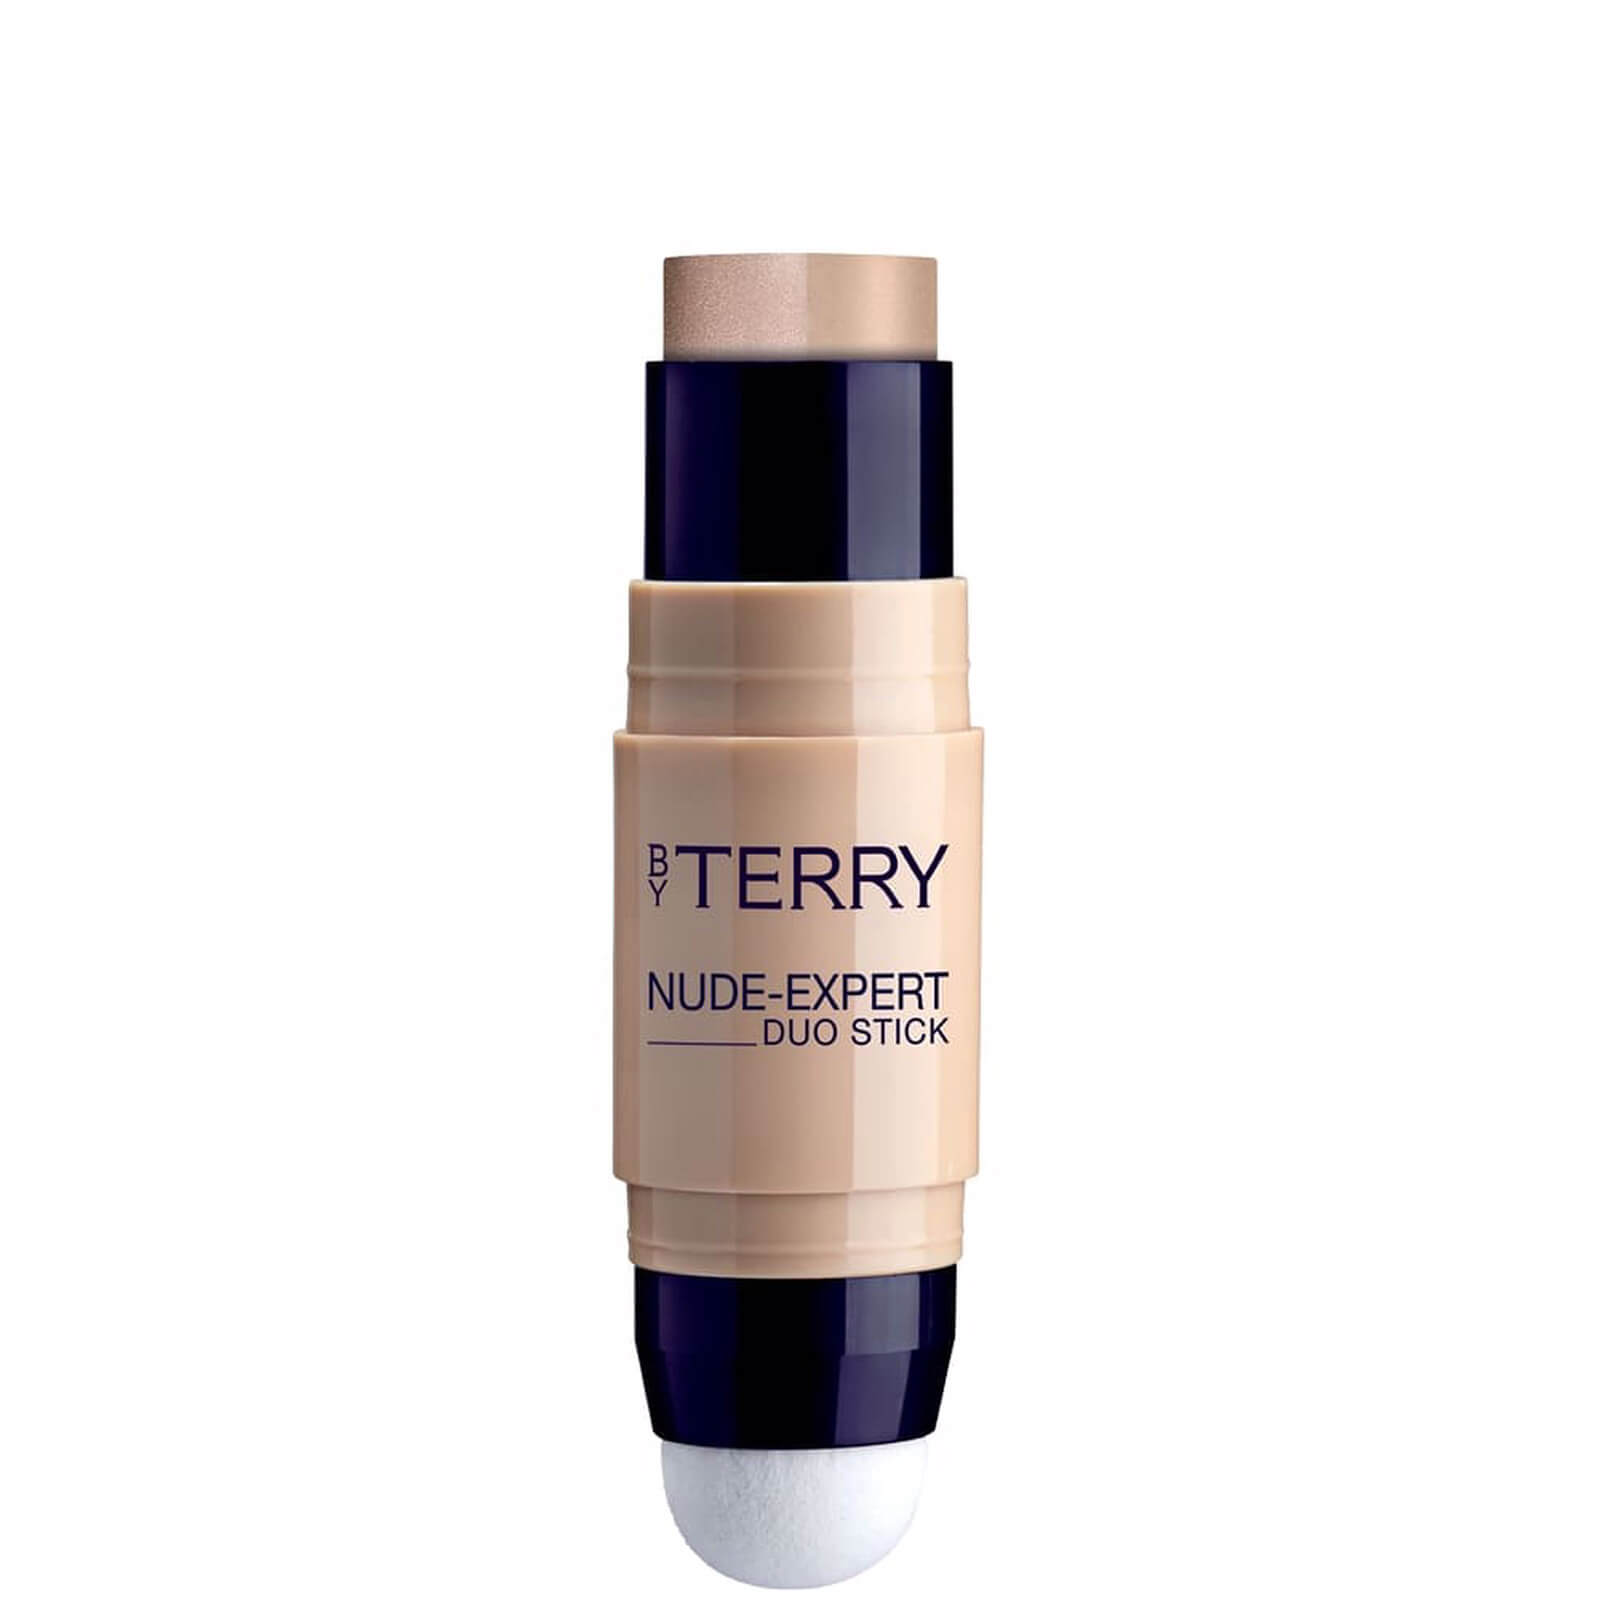 By Terry Nude-Expert Foundation (Various Shades) - 5. Peach Beige